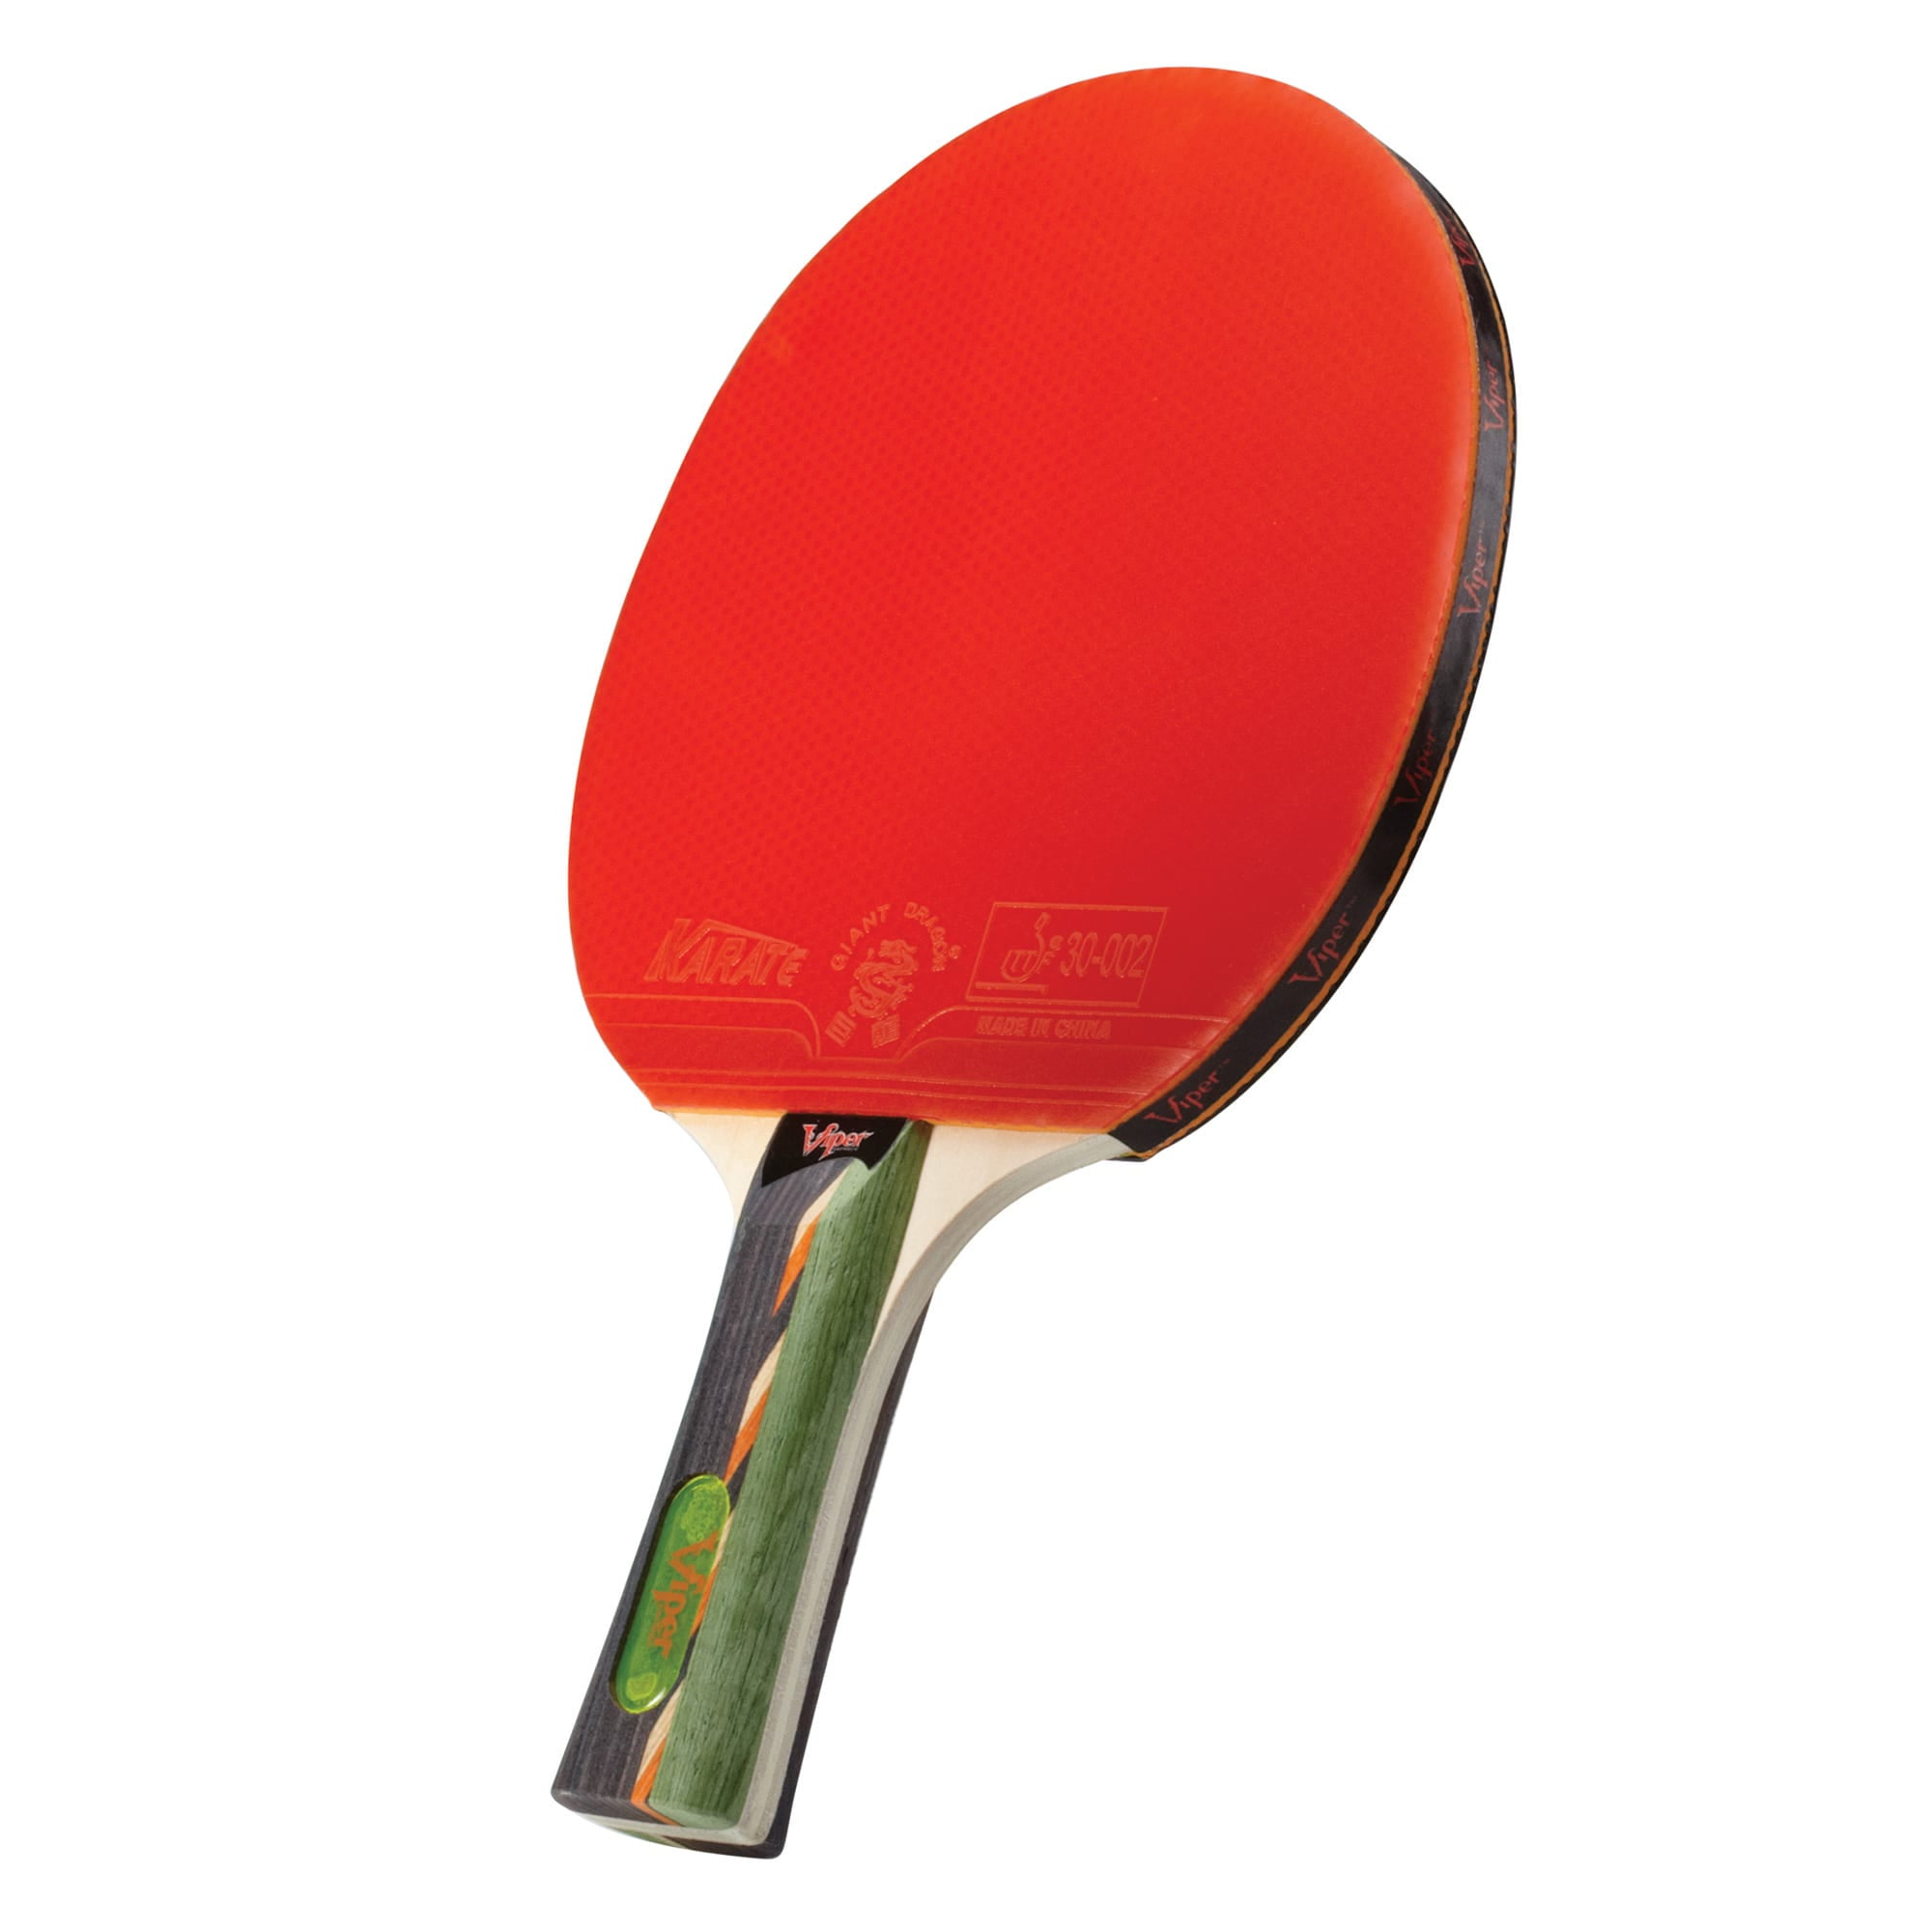 Flared Details about   NEW Killerspin 106-01 RTG Series-Kido 5A Edition Table Tennis Paddle 